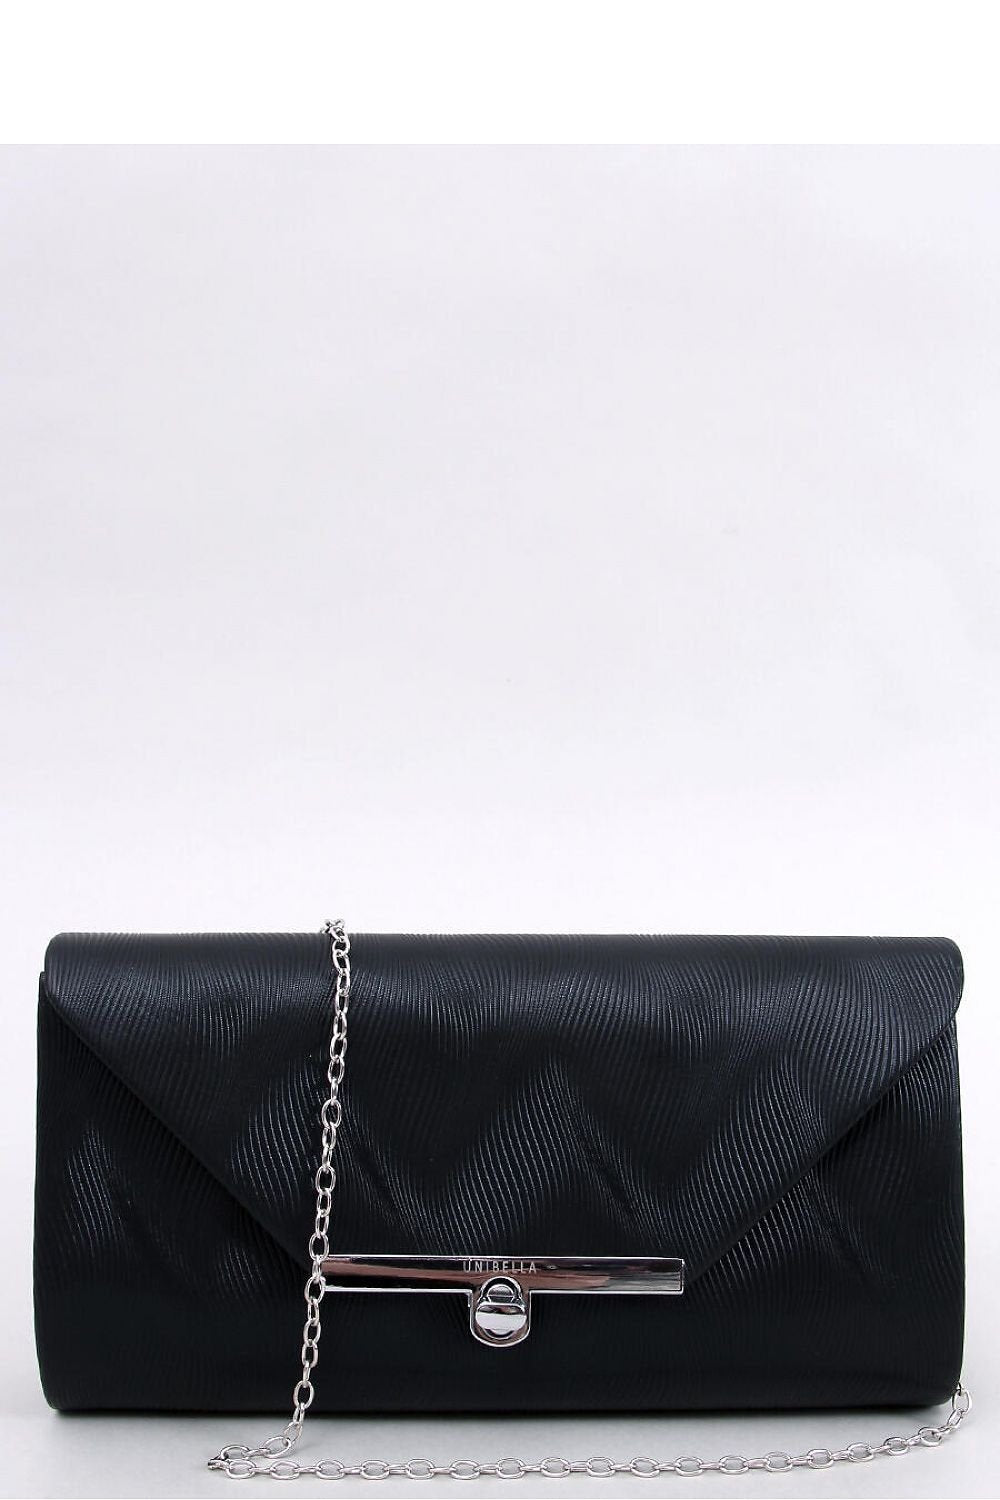 Envelope clutch bag - M&H FashionEnvelope clutch bagM&H FashionM&H Fashion192443_1116835one-size-fits-allEnvelope clutch bag InelloM&H FashionM&H FashionBlack handbag for women ? clutch bag. It can be worn in two ways ? in hand like a clutch bag or on a delicate silver chain. It is fastened with a stylish magnetic clEnvelope clutch bag